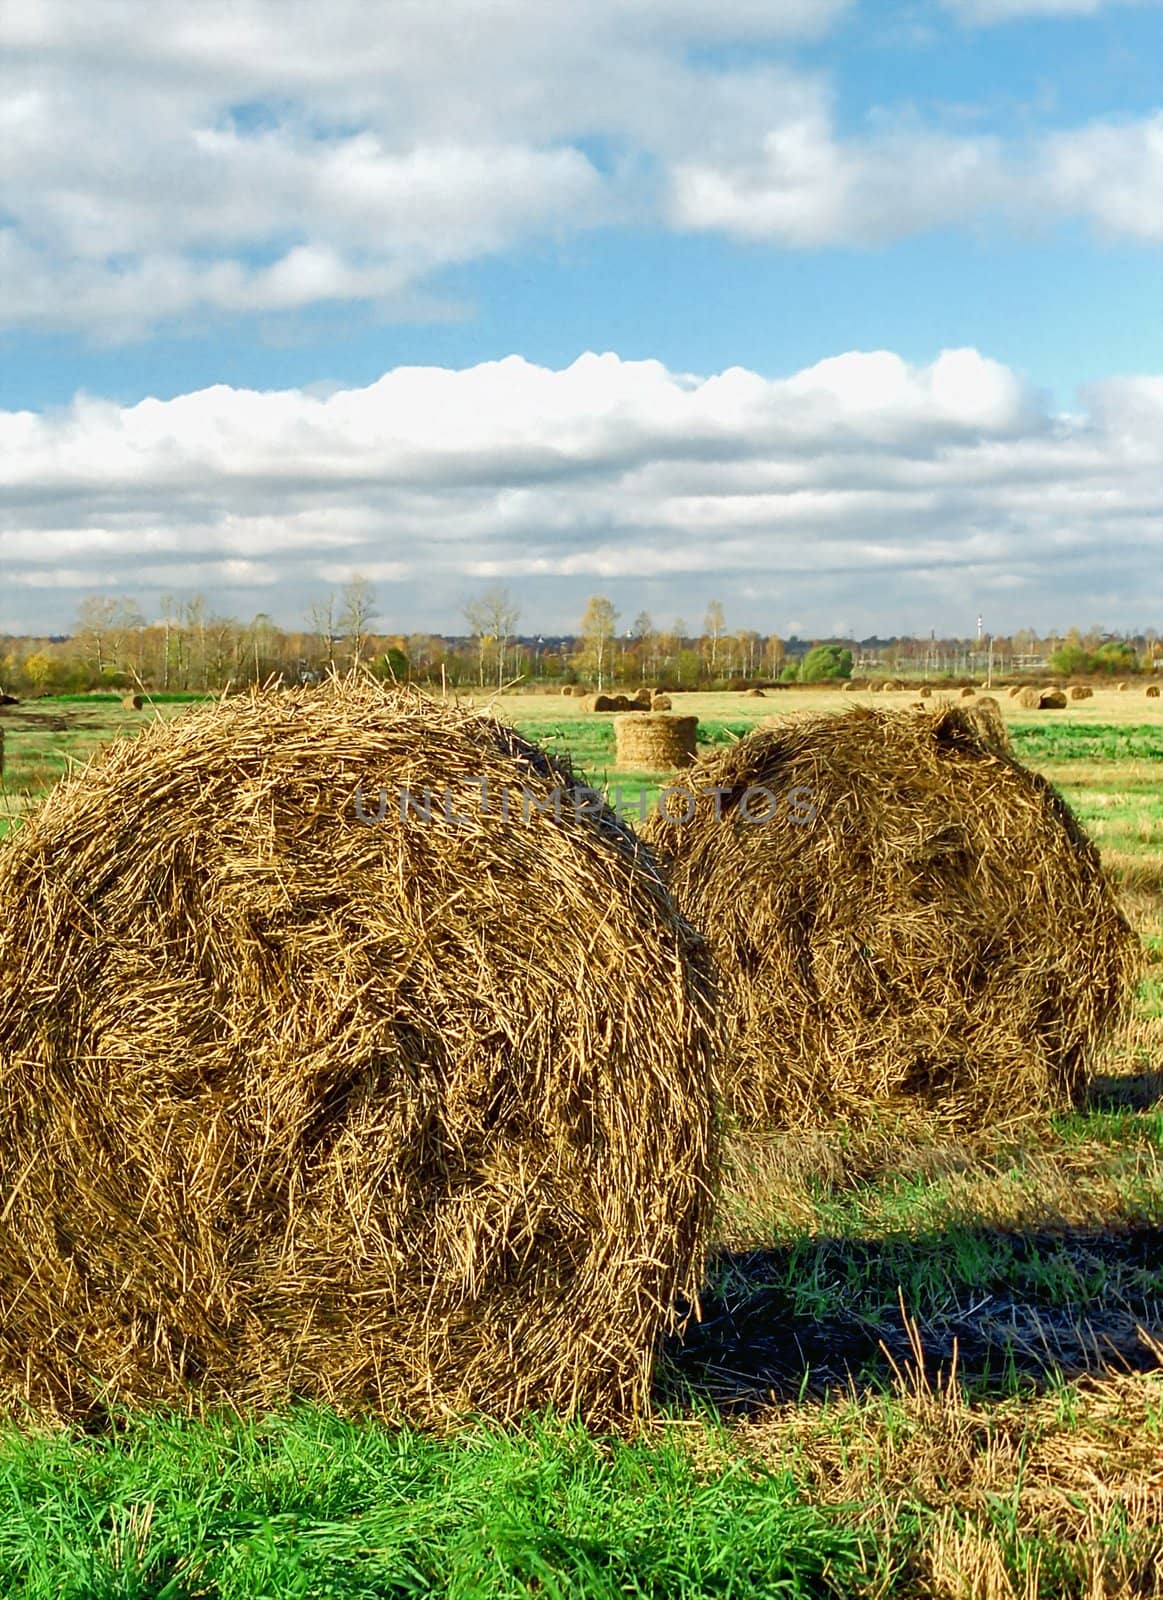 Two rolls of hay on the foreground